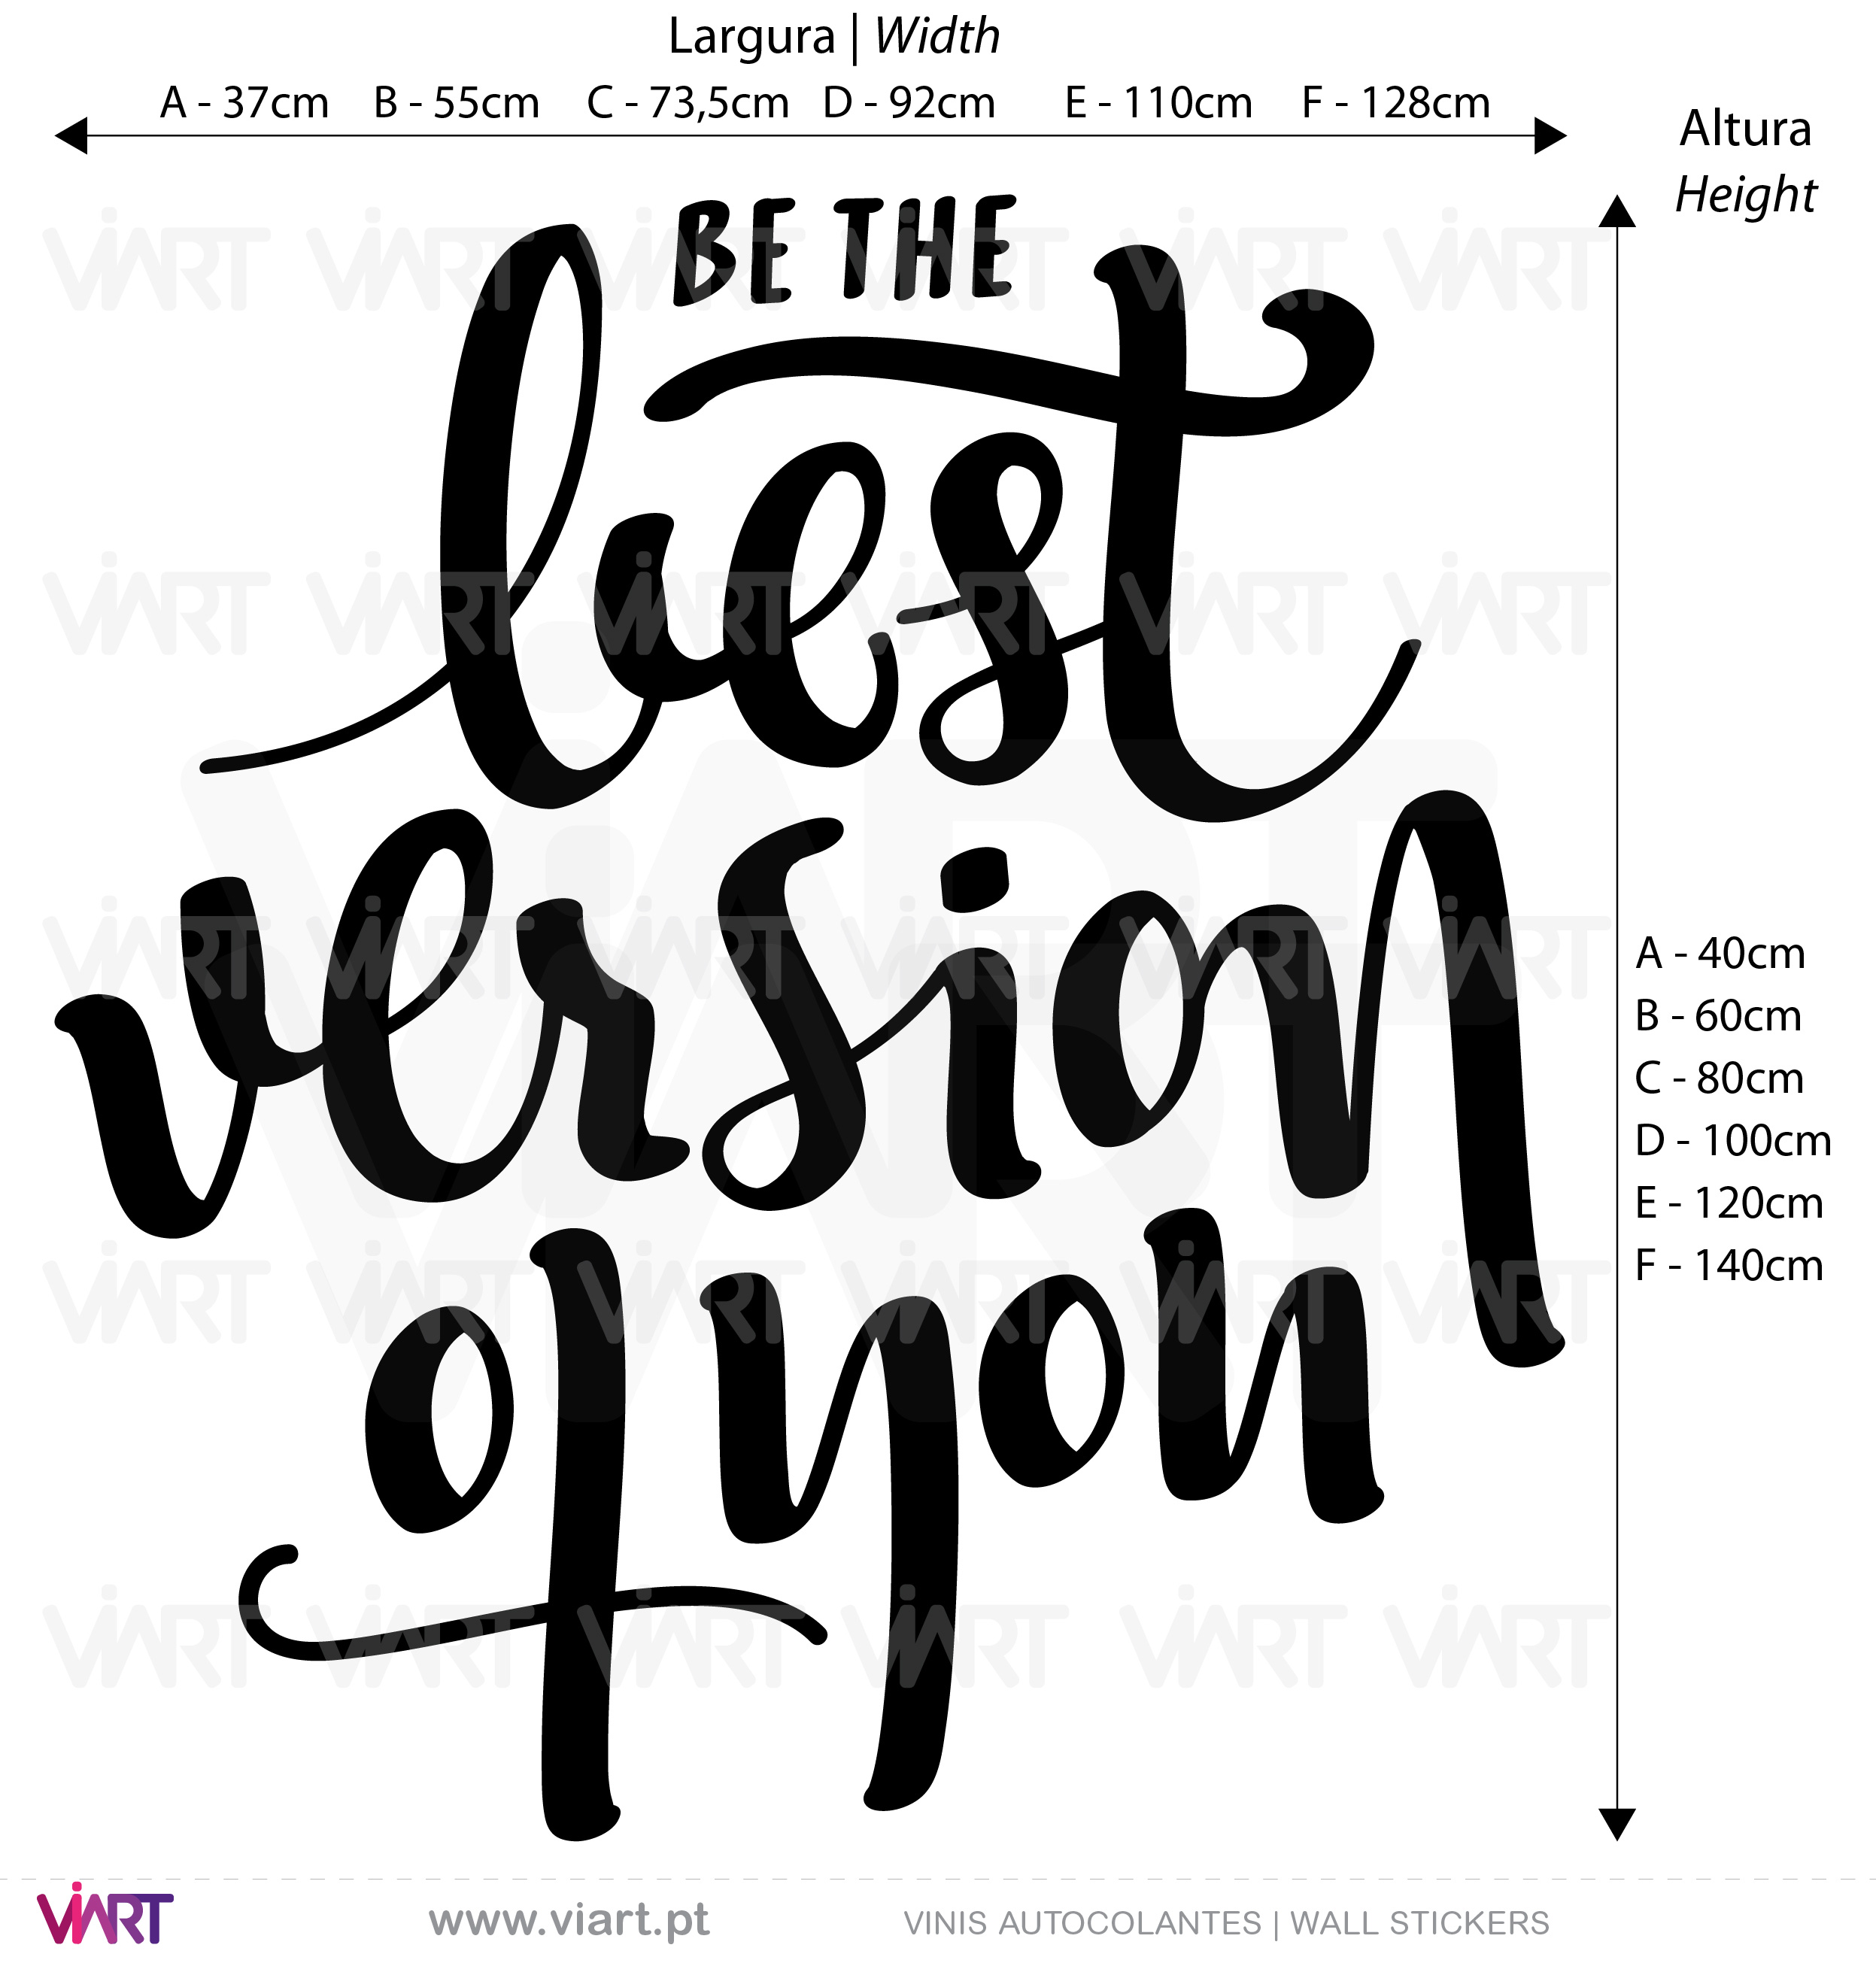 Be the best version of you - Wall Stickers - Decals